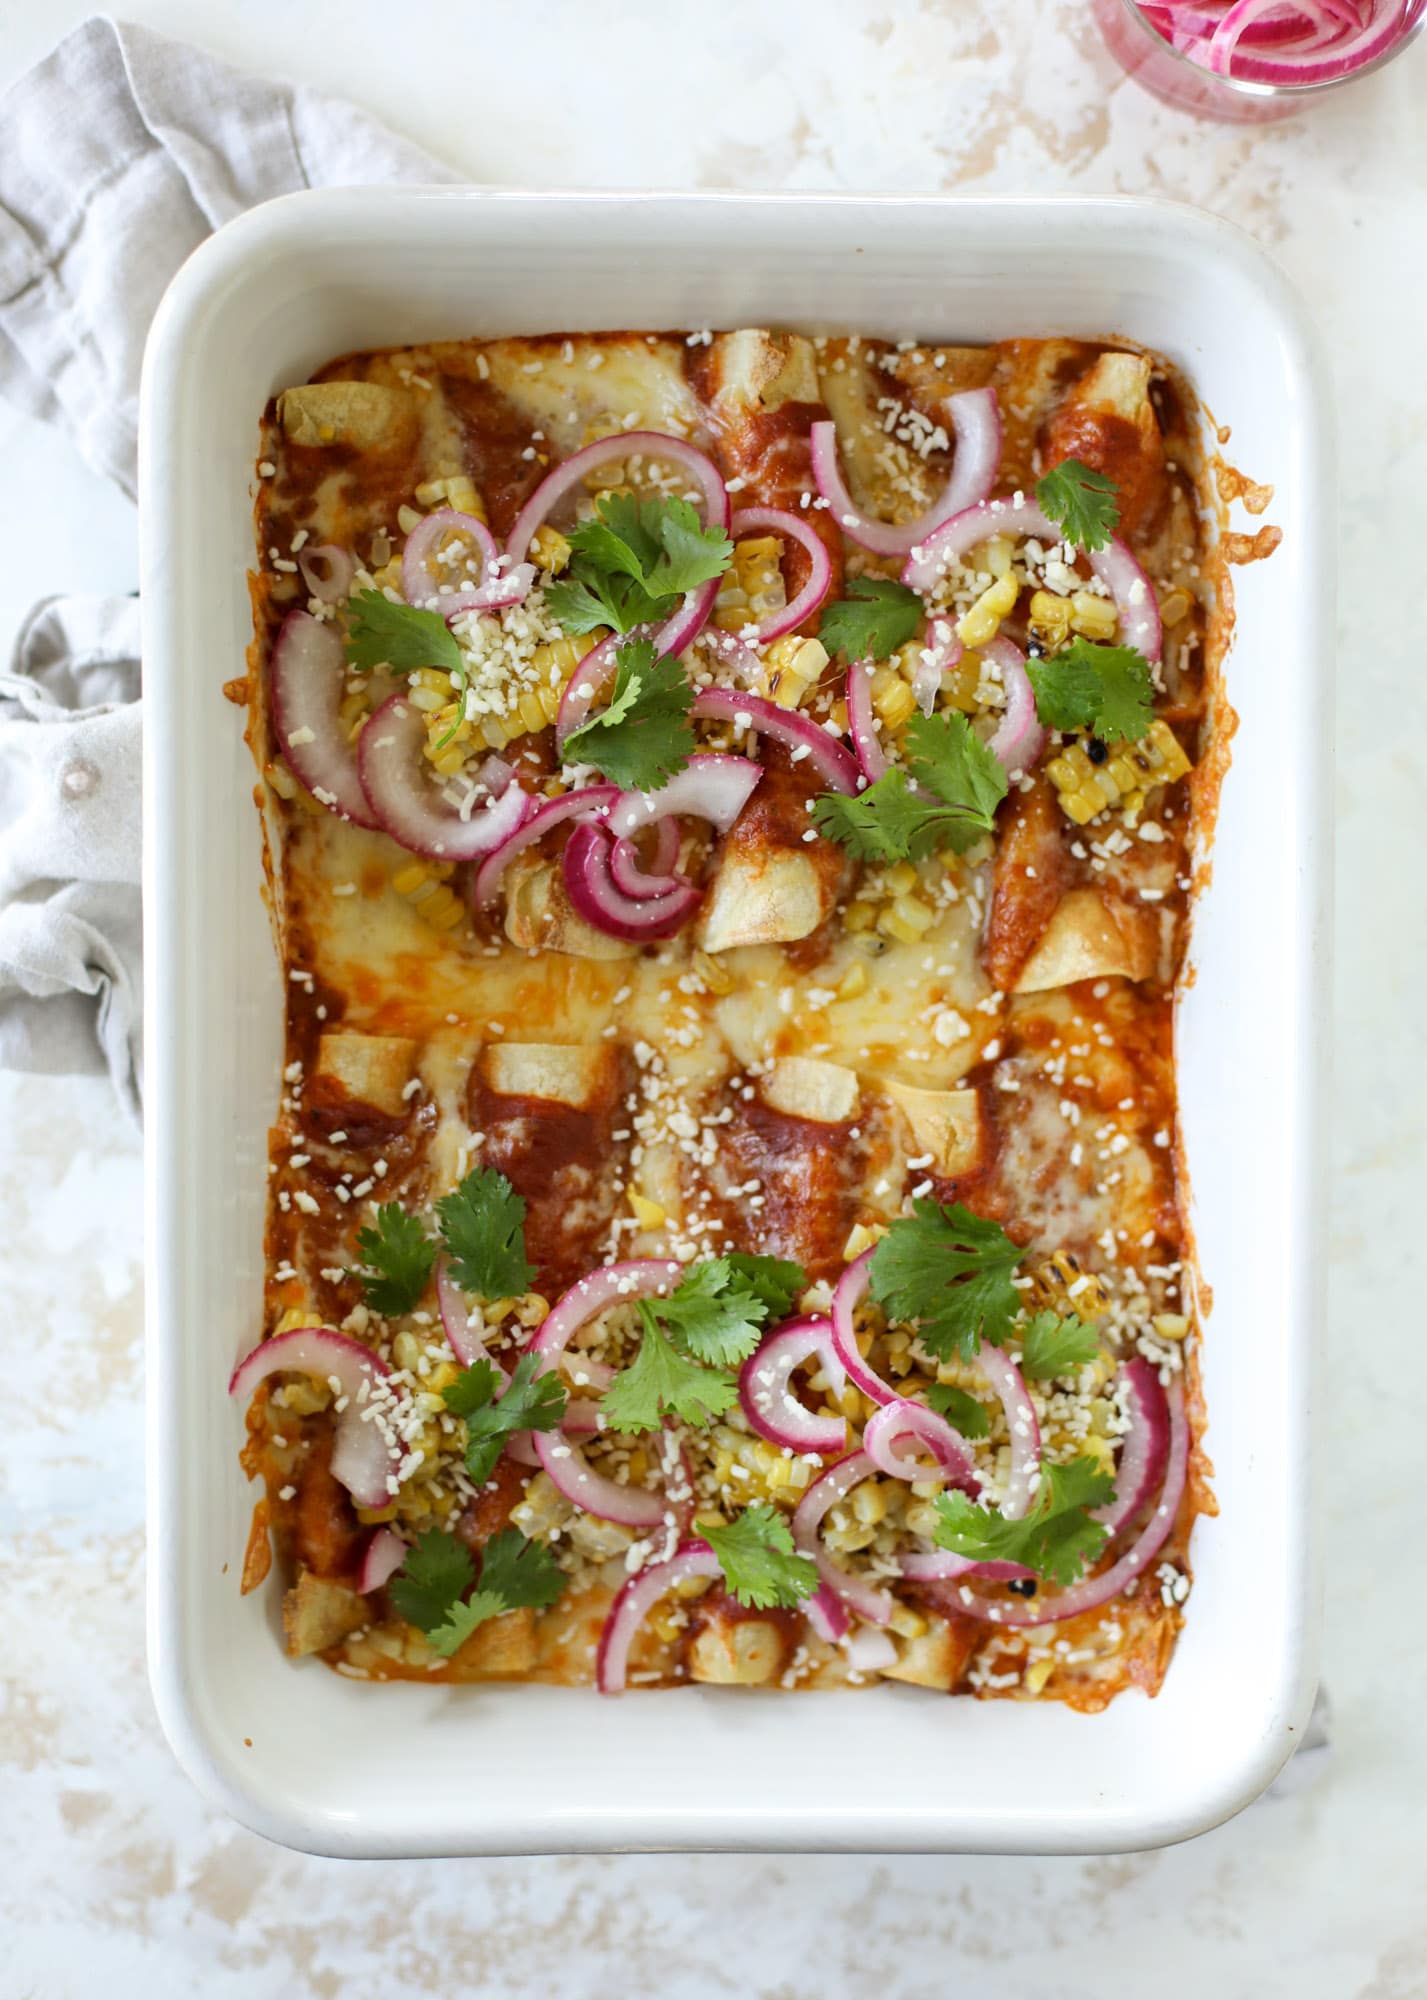 These grilled corn enchiladas are the perfect summer meal! Grilled corn, zucchini, homemade sauce and cheese come together for a flavor explosion!